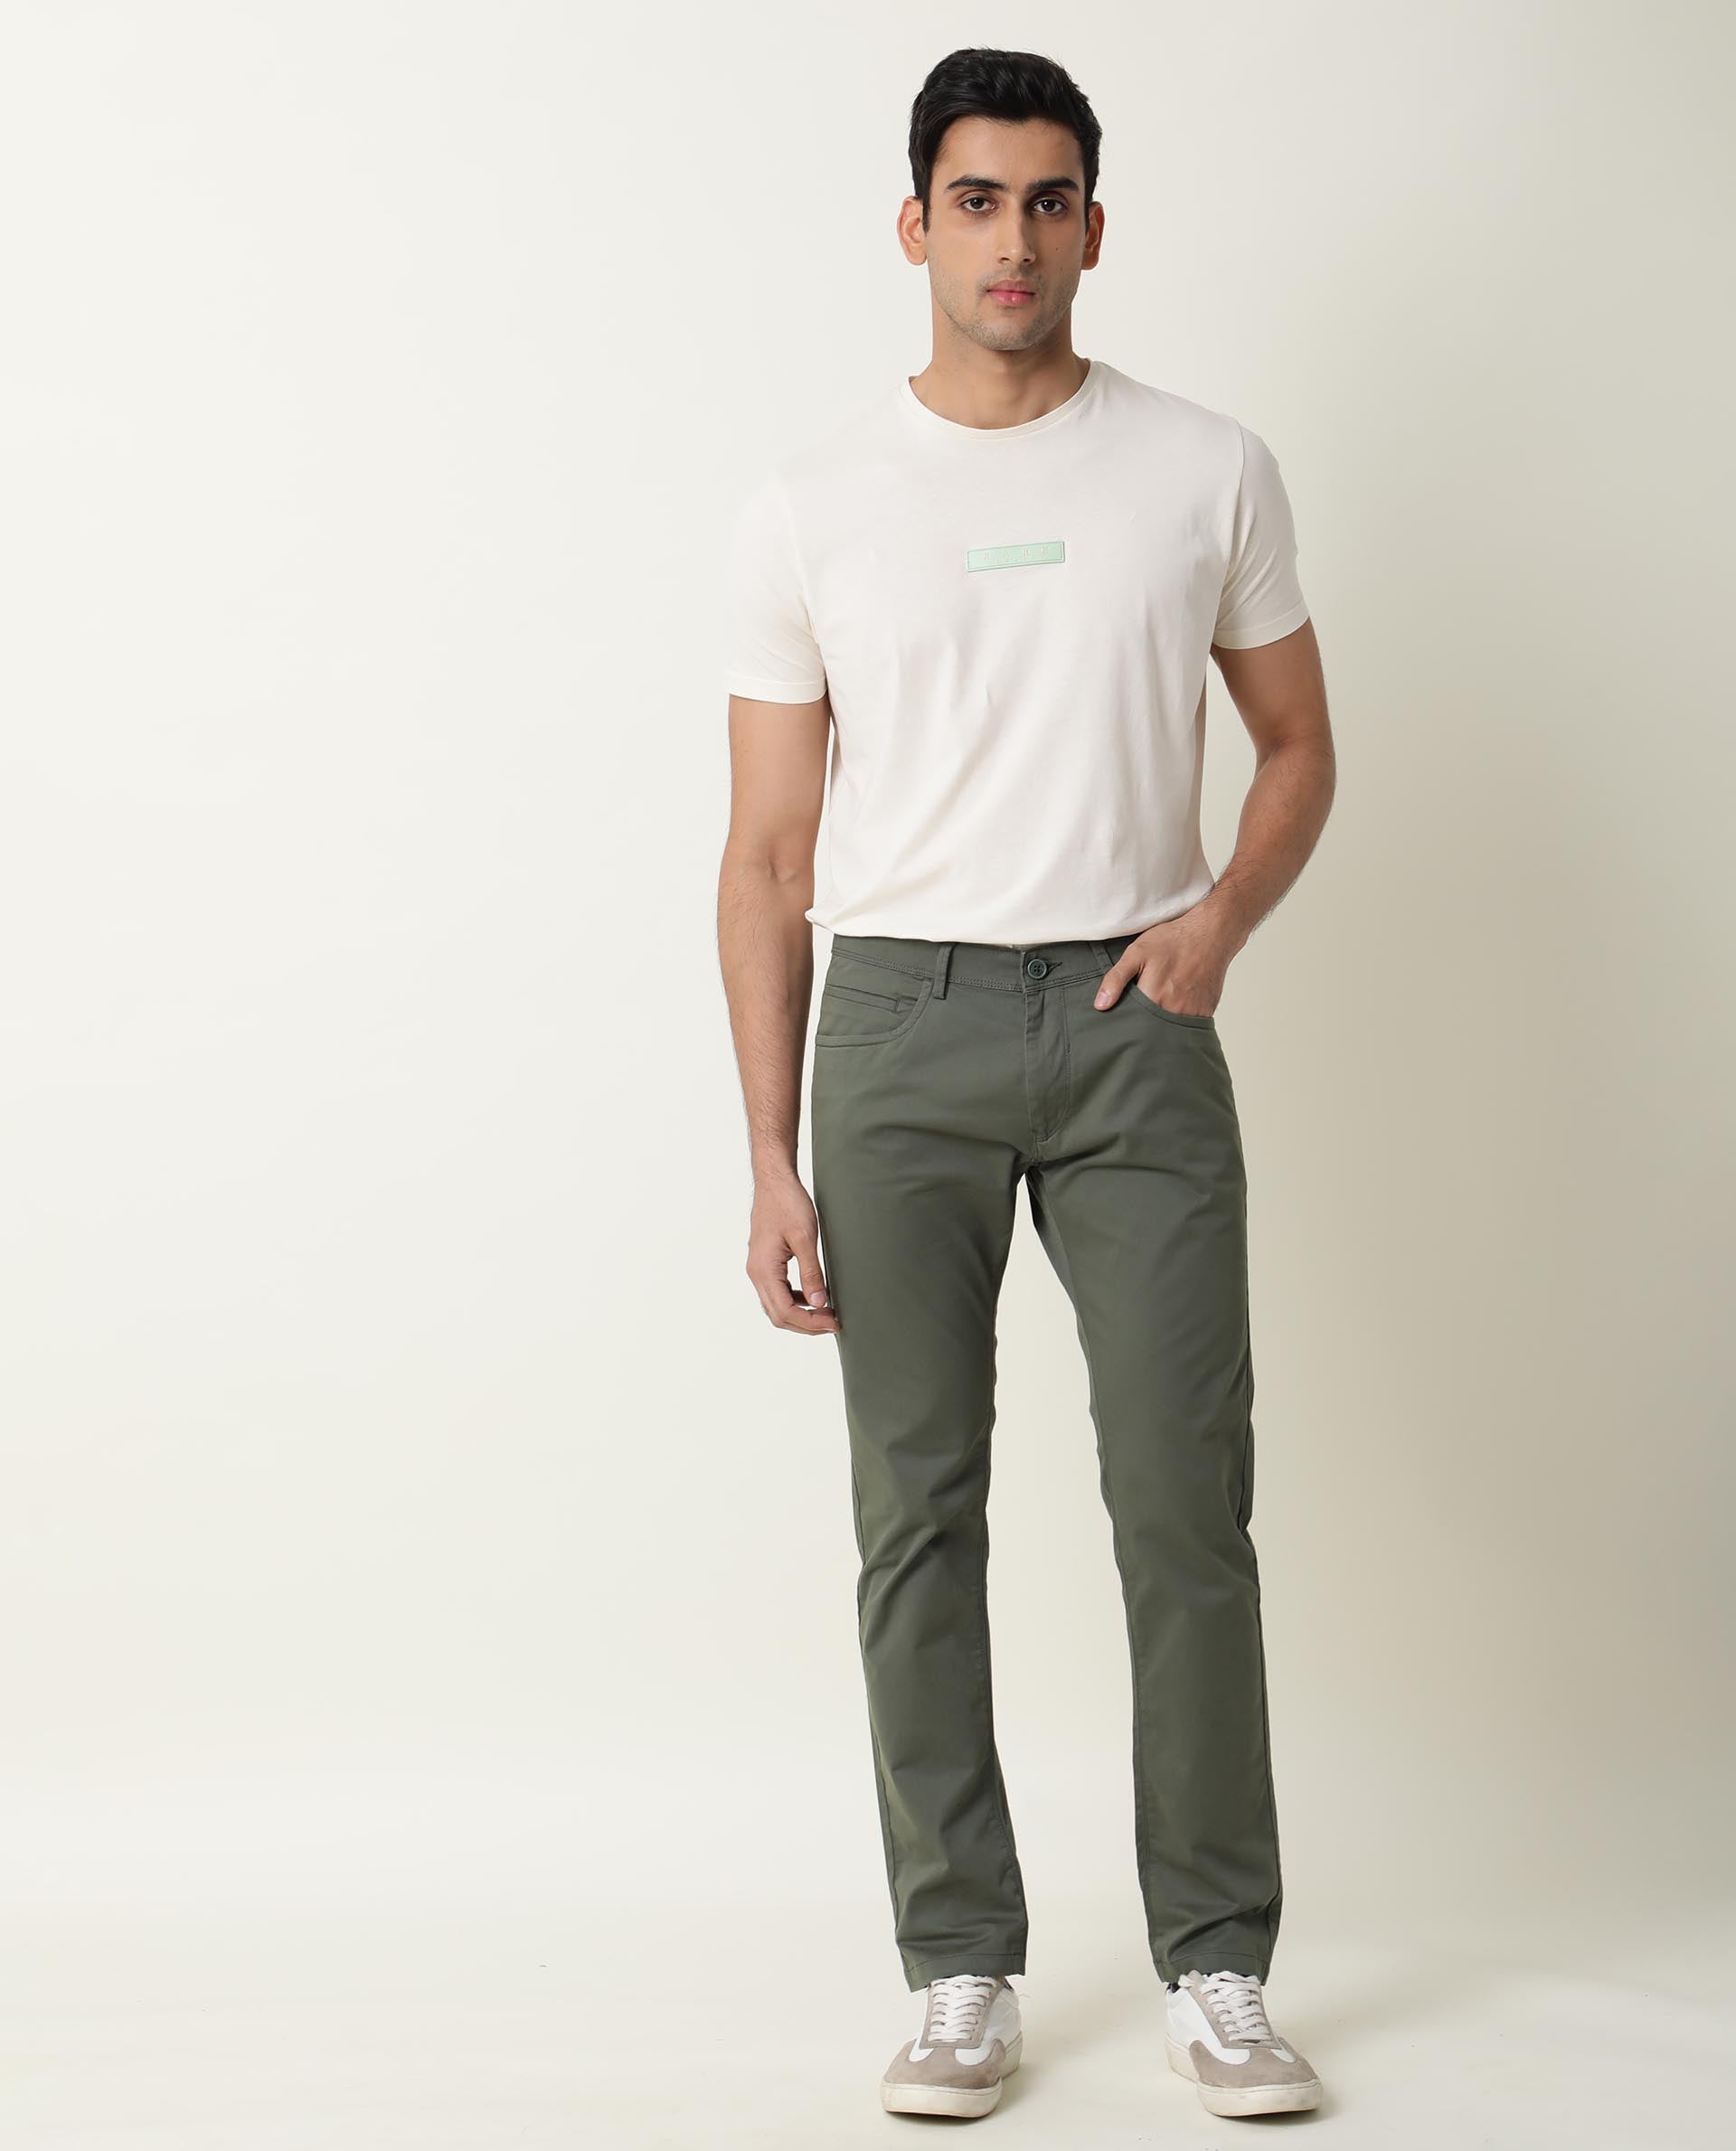 Akiihool Pants for Men Relaxed Casual Men's Classic Fit Resistant Pleated  Chino Pant (Army Green,L) - Walmart.com